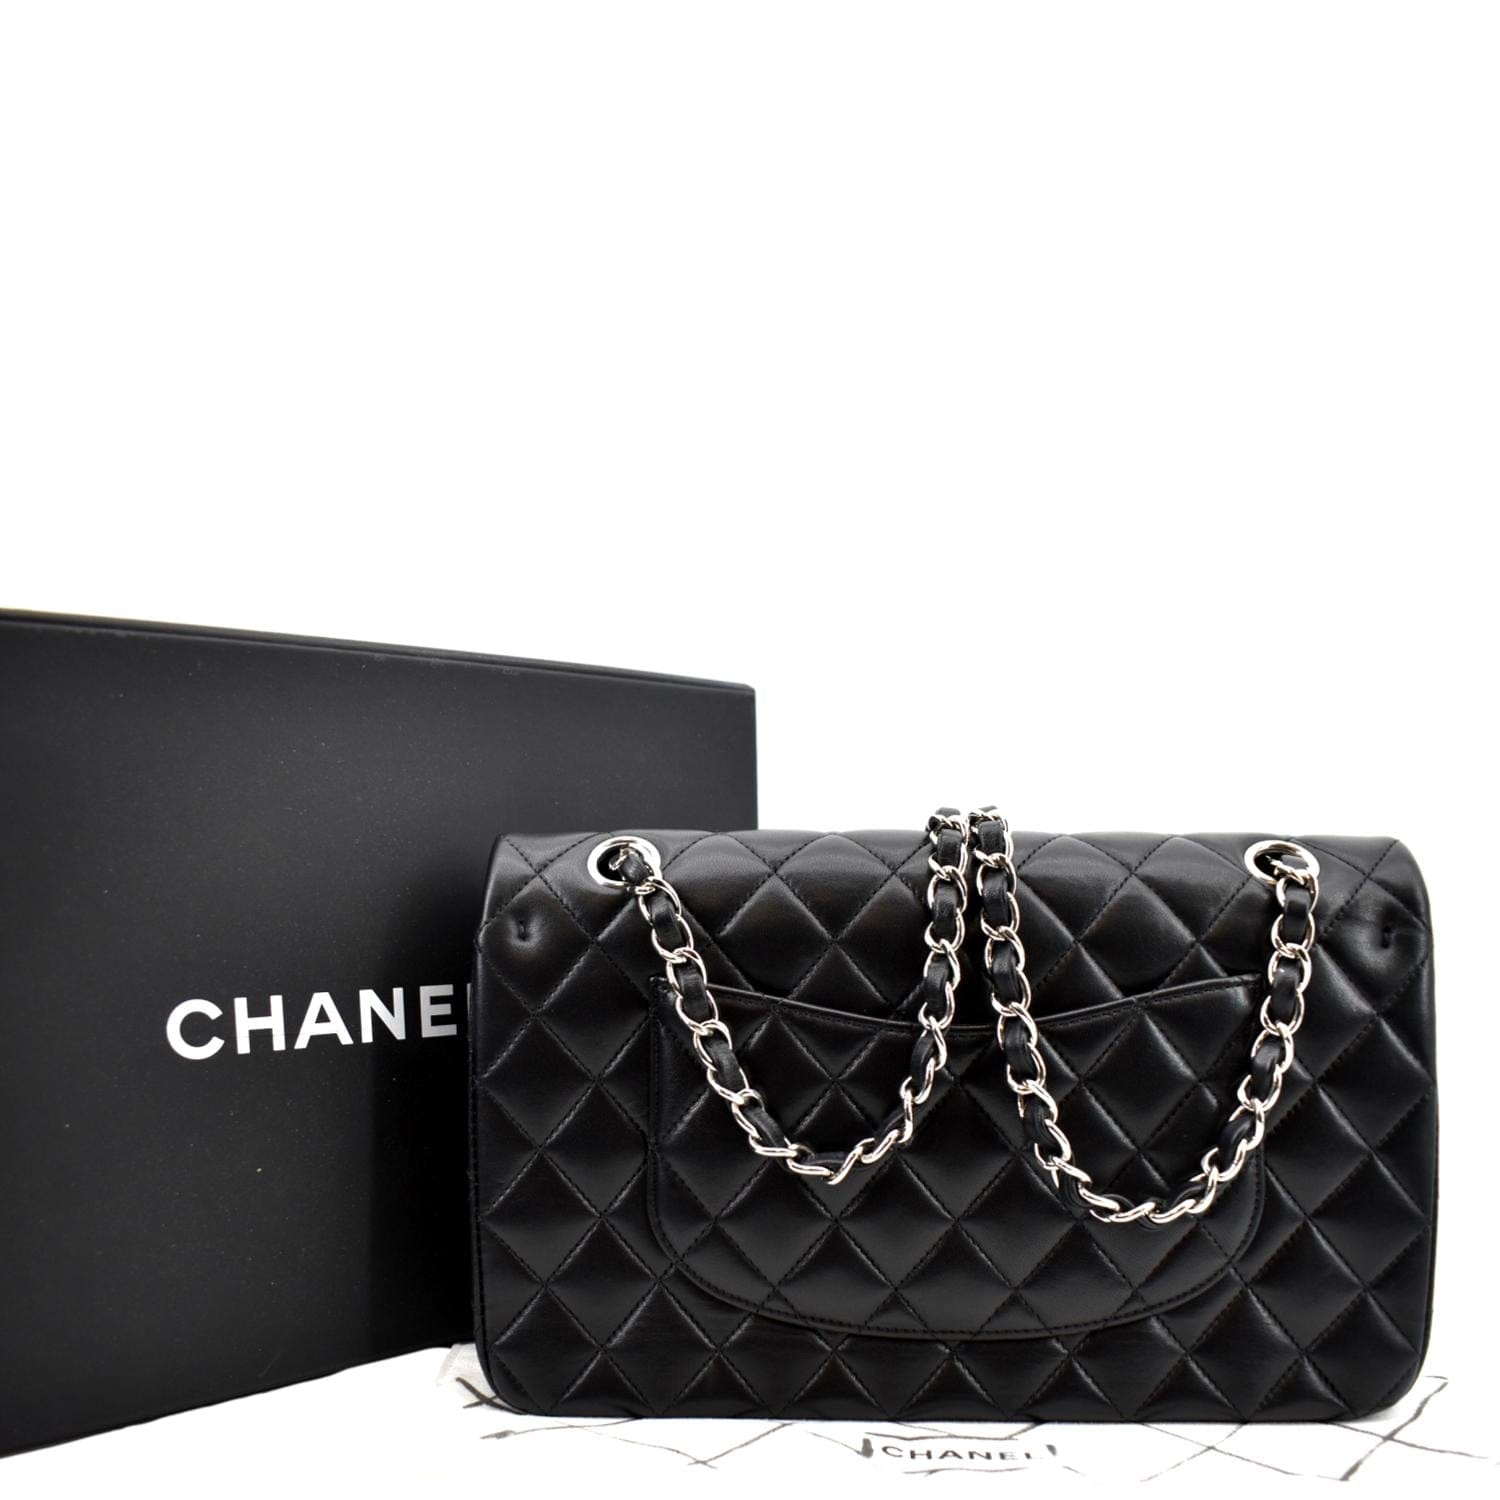 Authentic Chanel Classic Black Quilted Caviar Leather Classic Medium Double Flap Bag